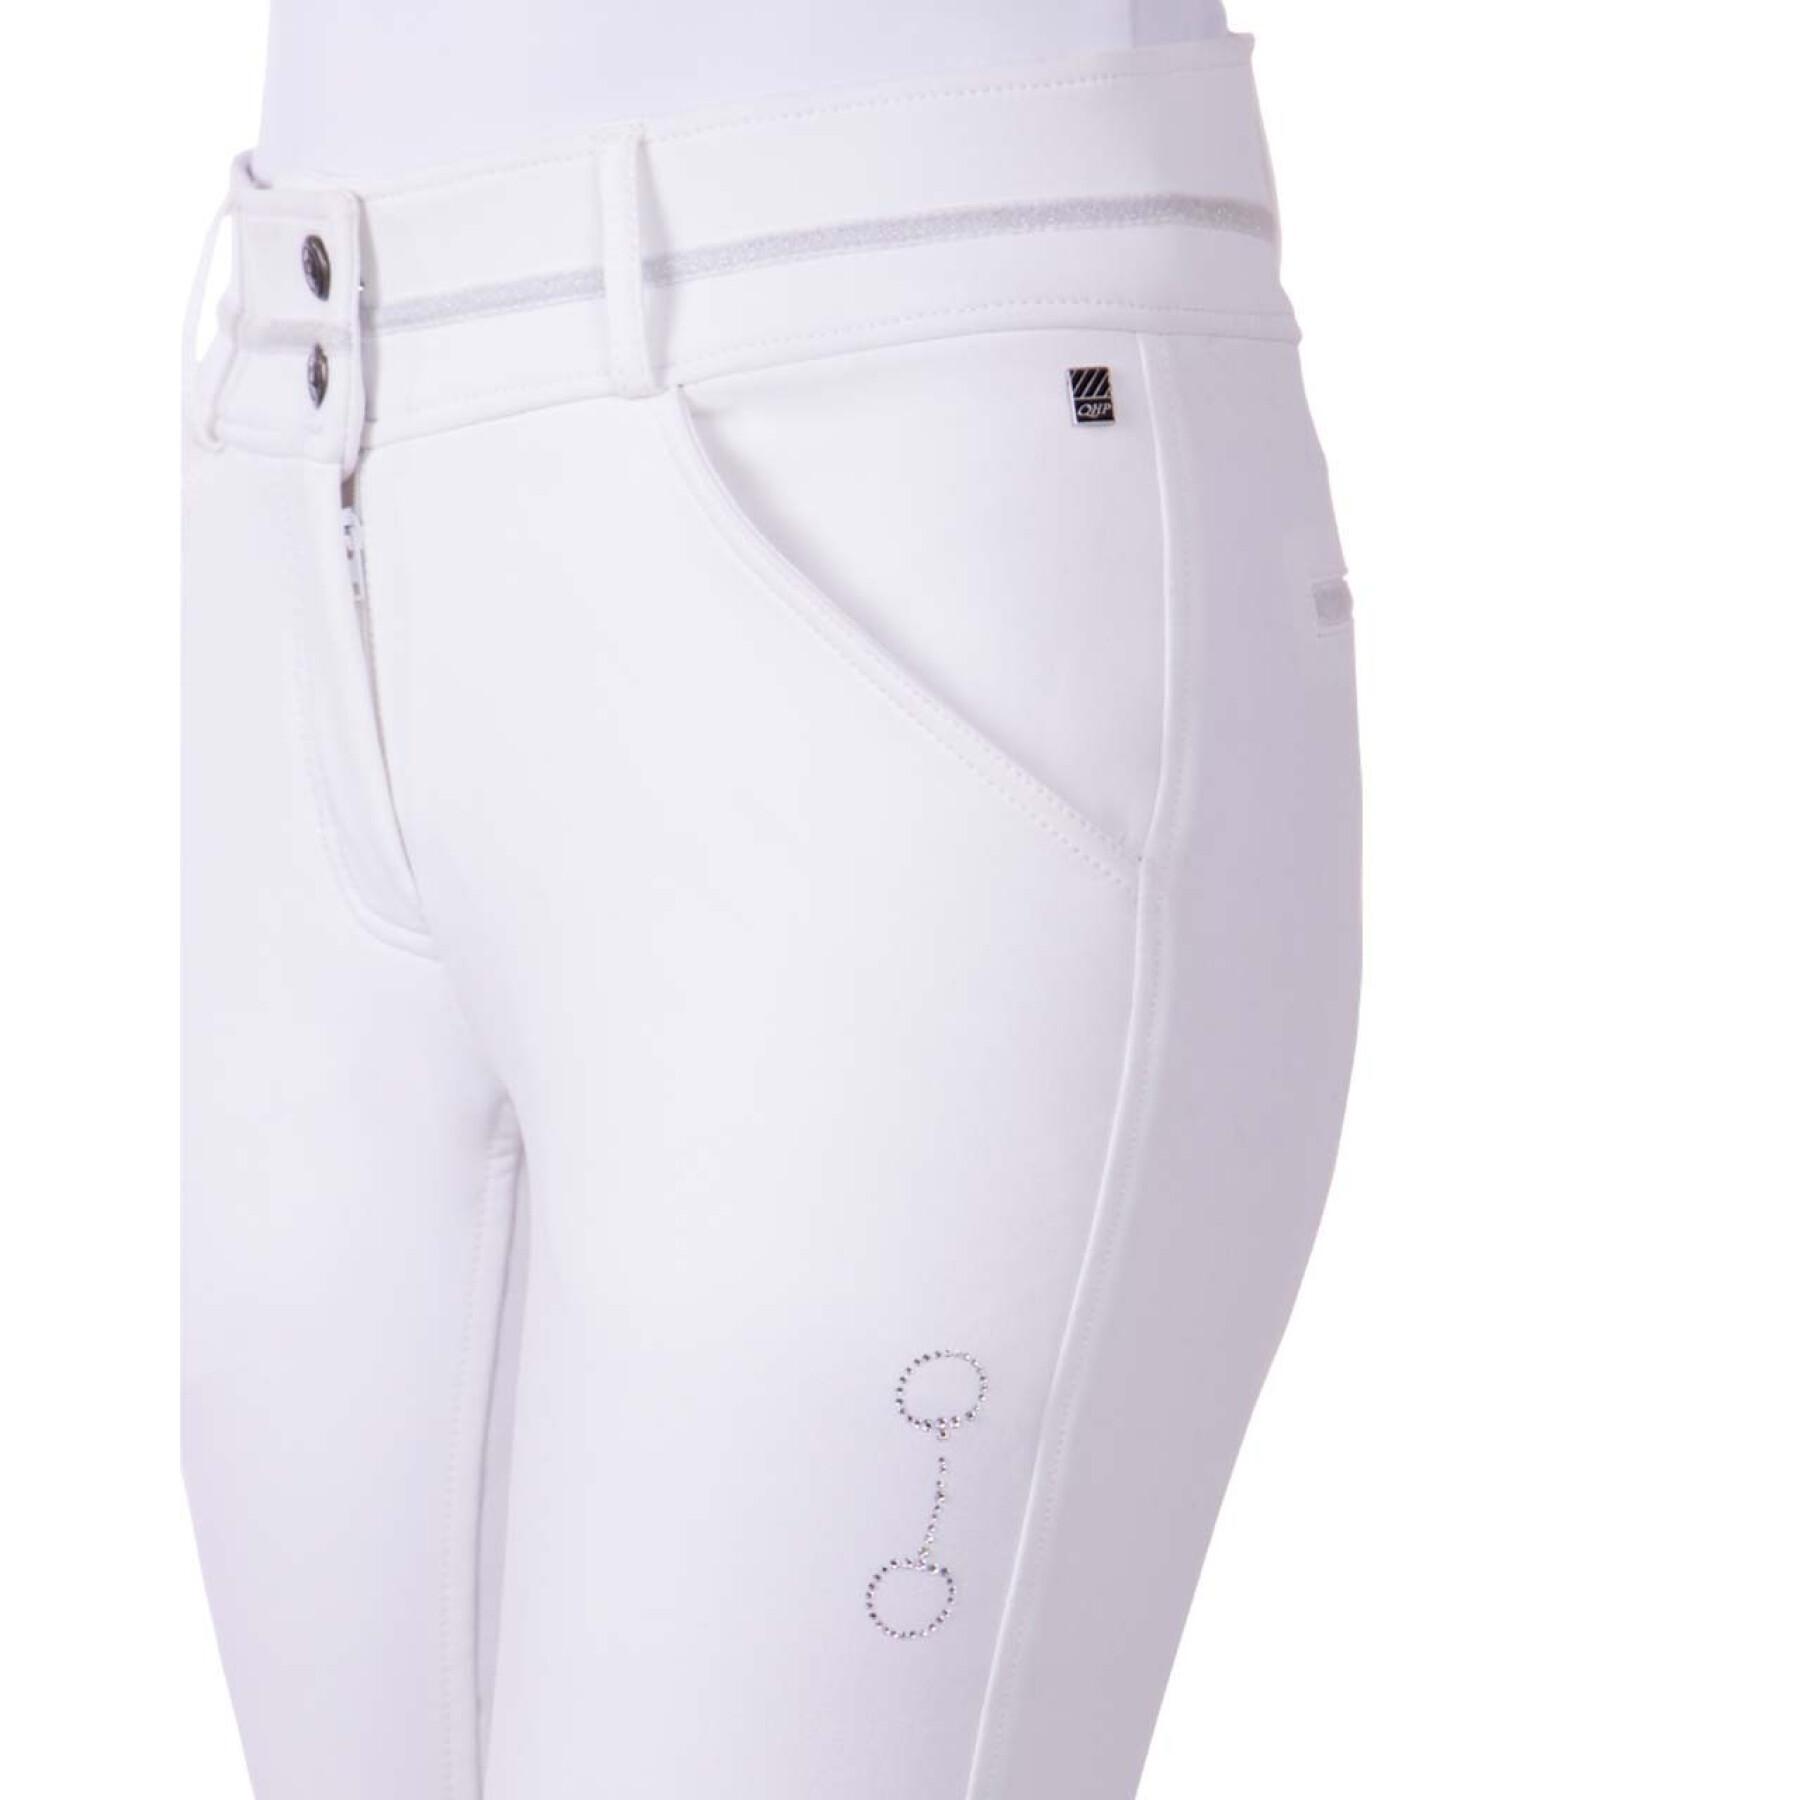 Full grip riding pants QHP Carrie